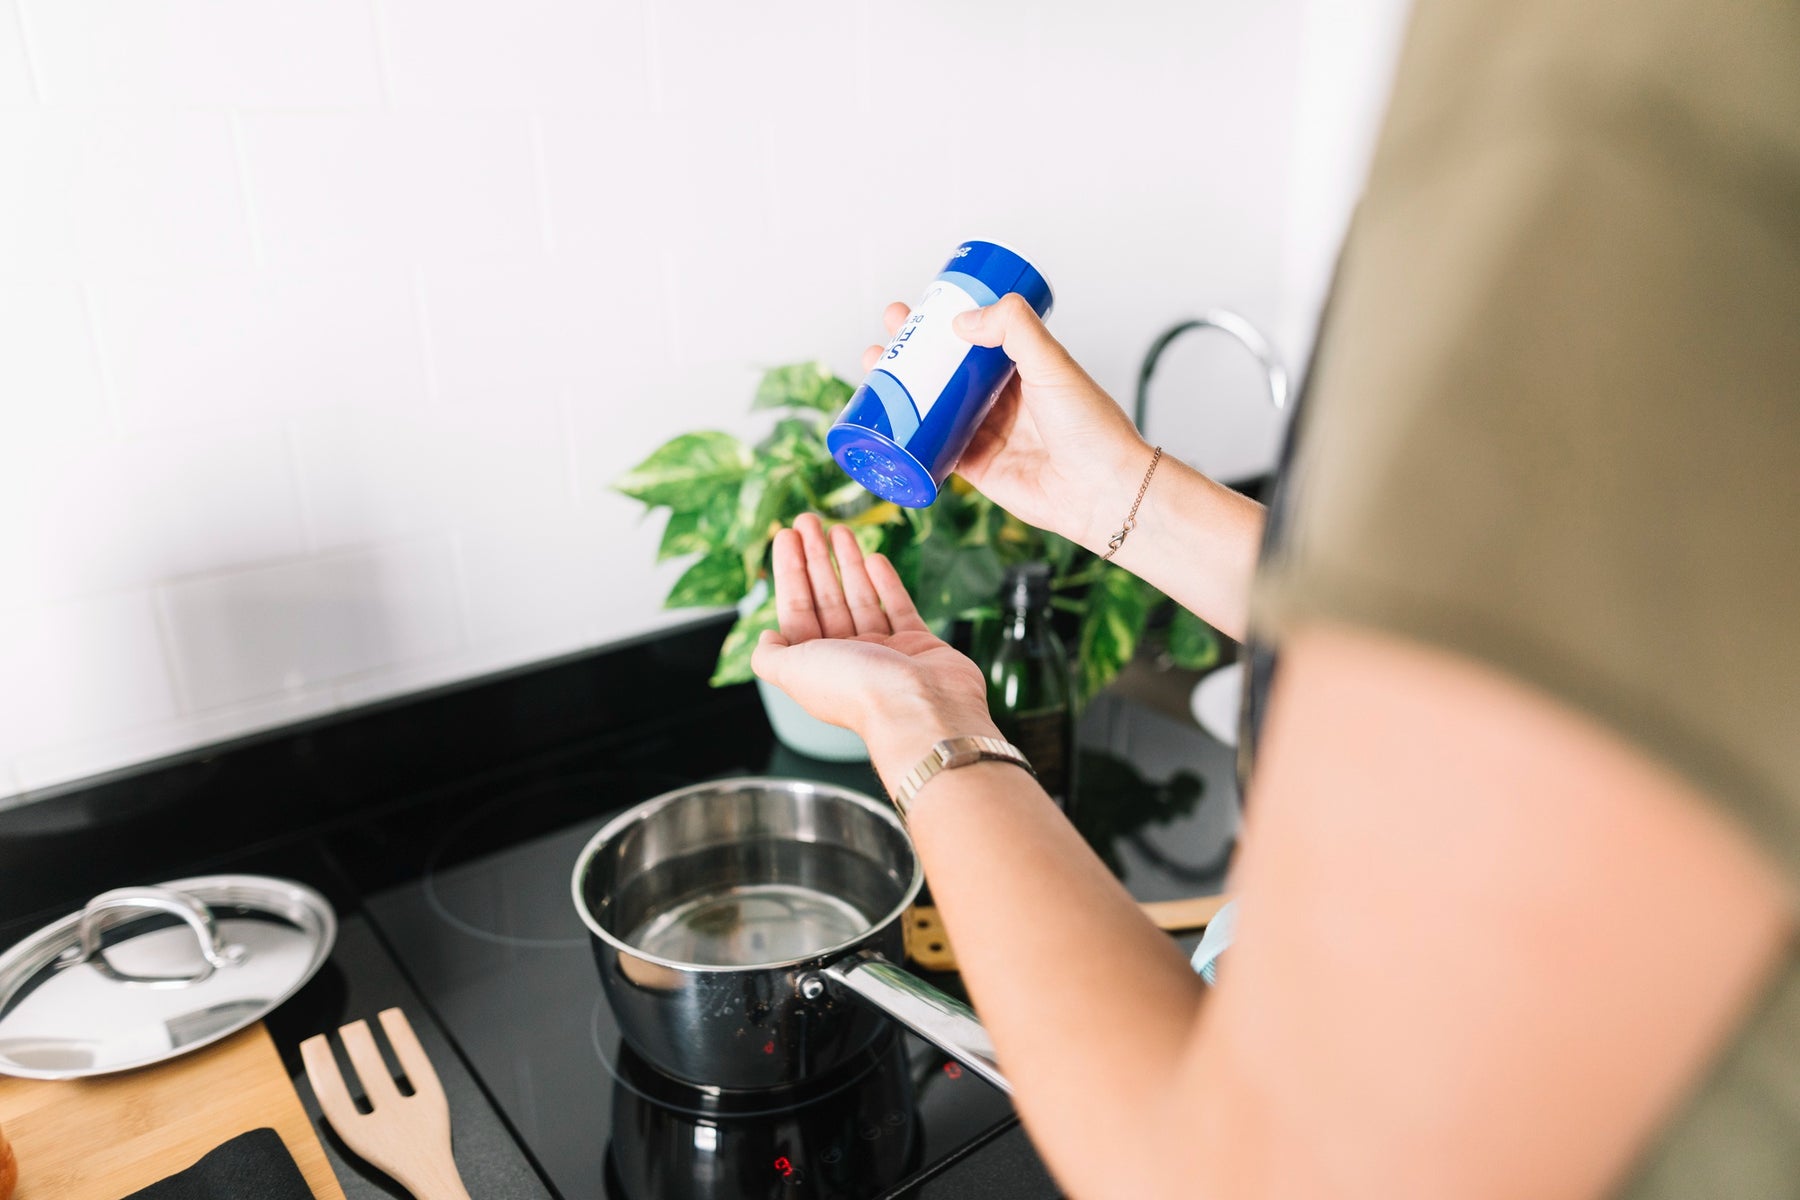 Homemade Weed Killer: How To Make an Effective Solution Using Kitchen Items